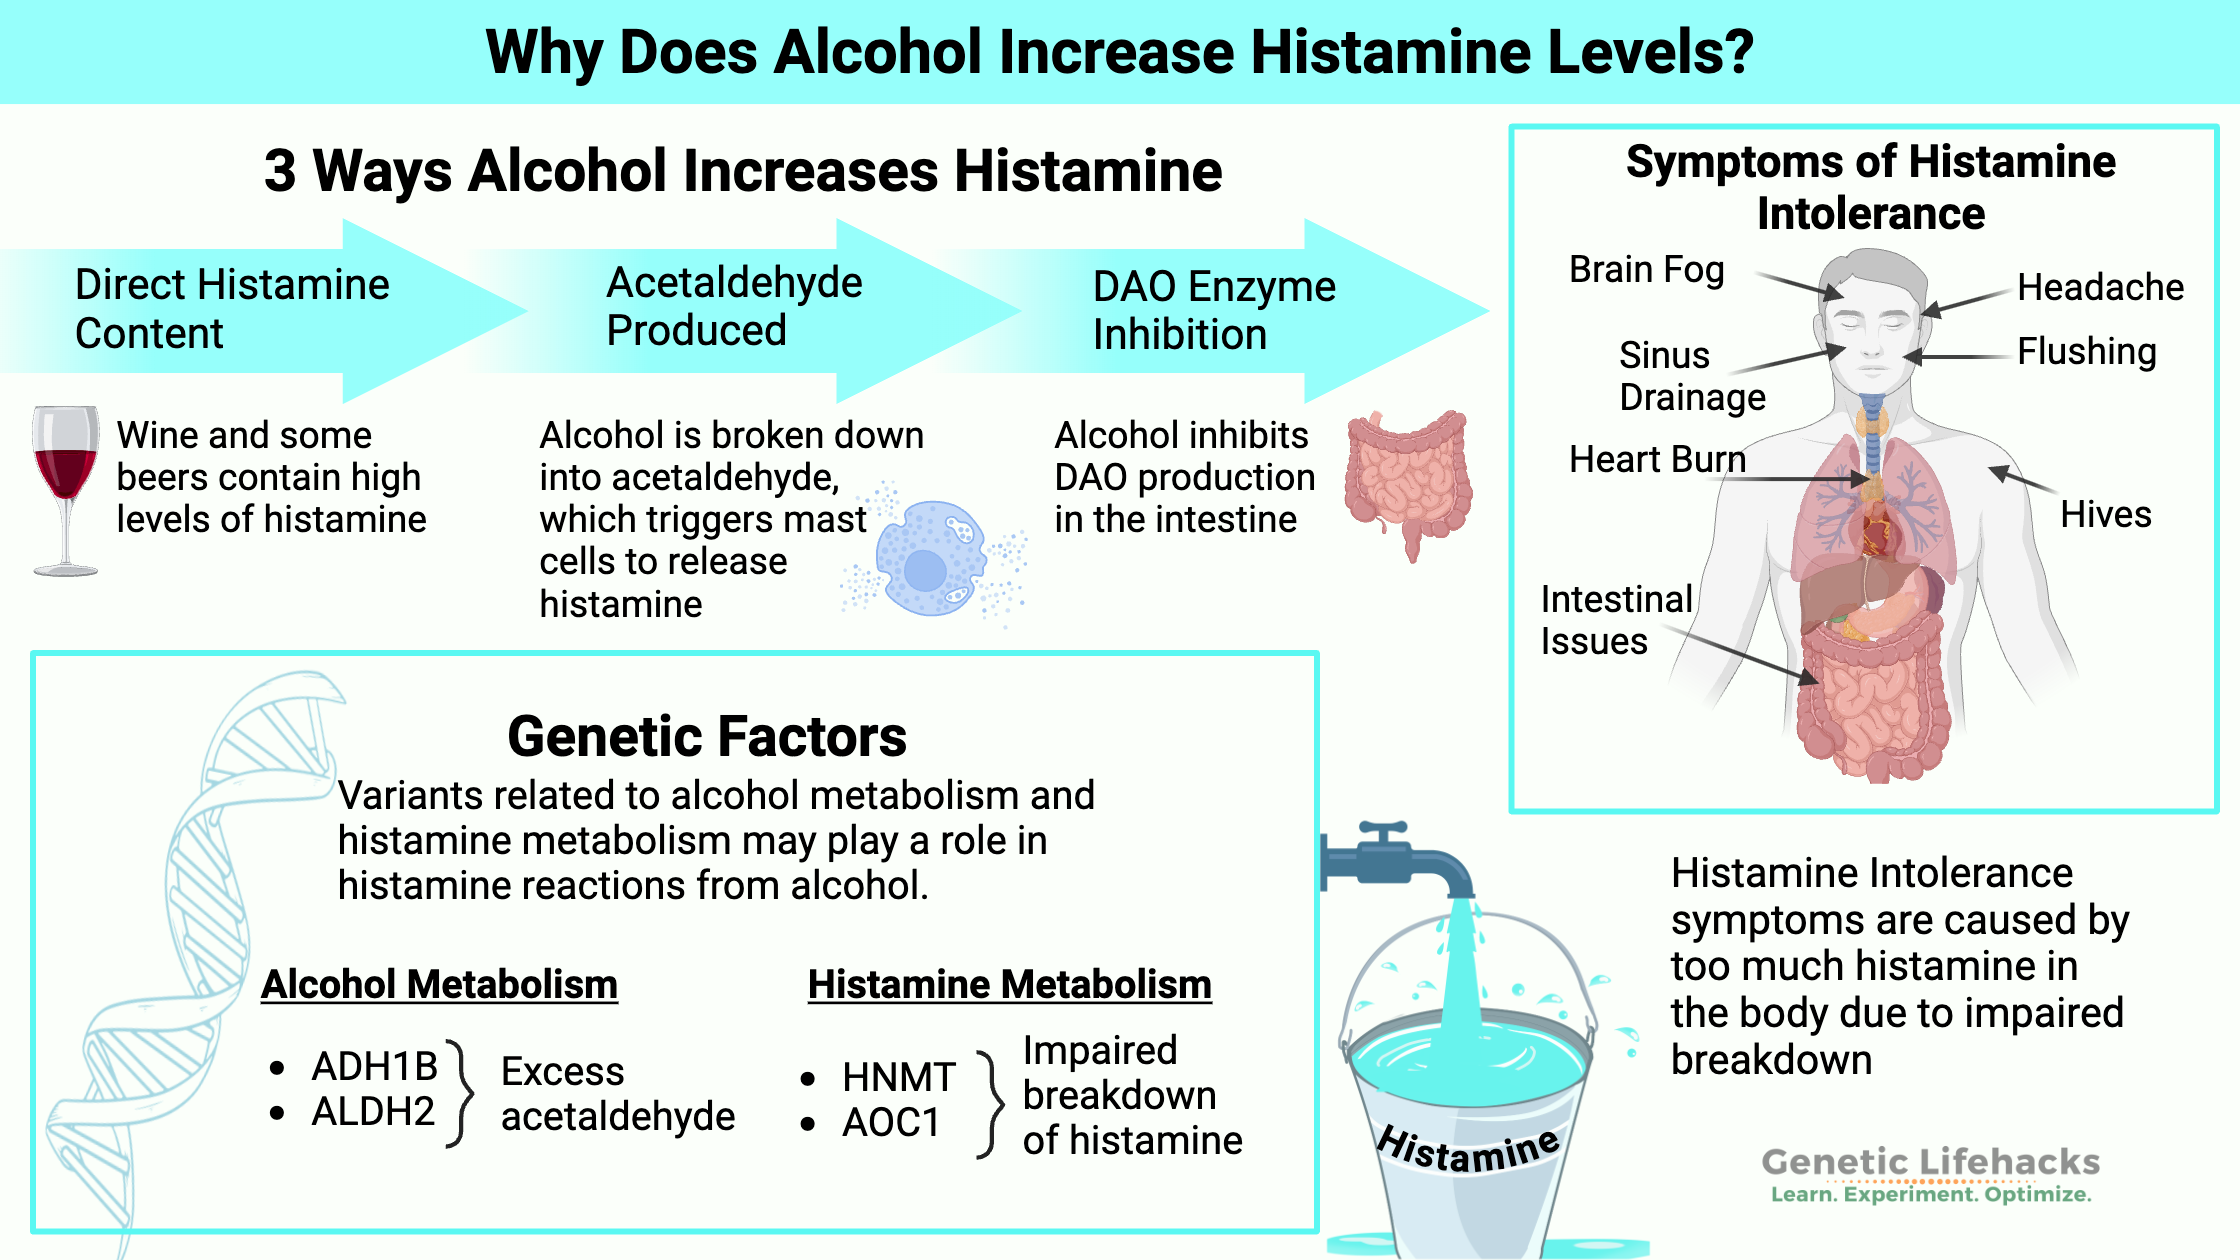 Alcohol and Histamine intolerance, DAO enzyme, symptoms of histamine intolerance